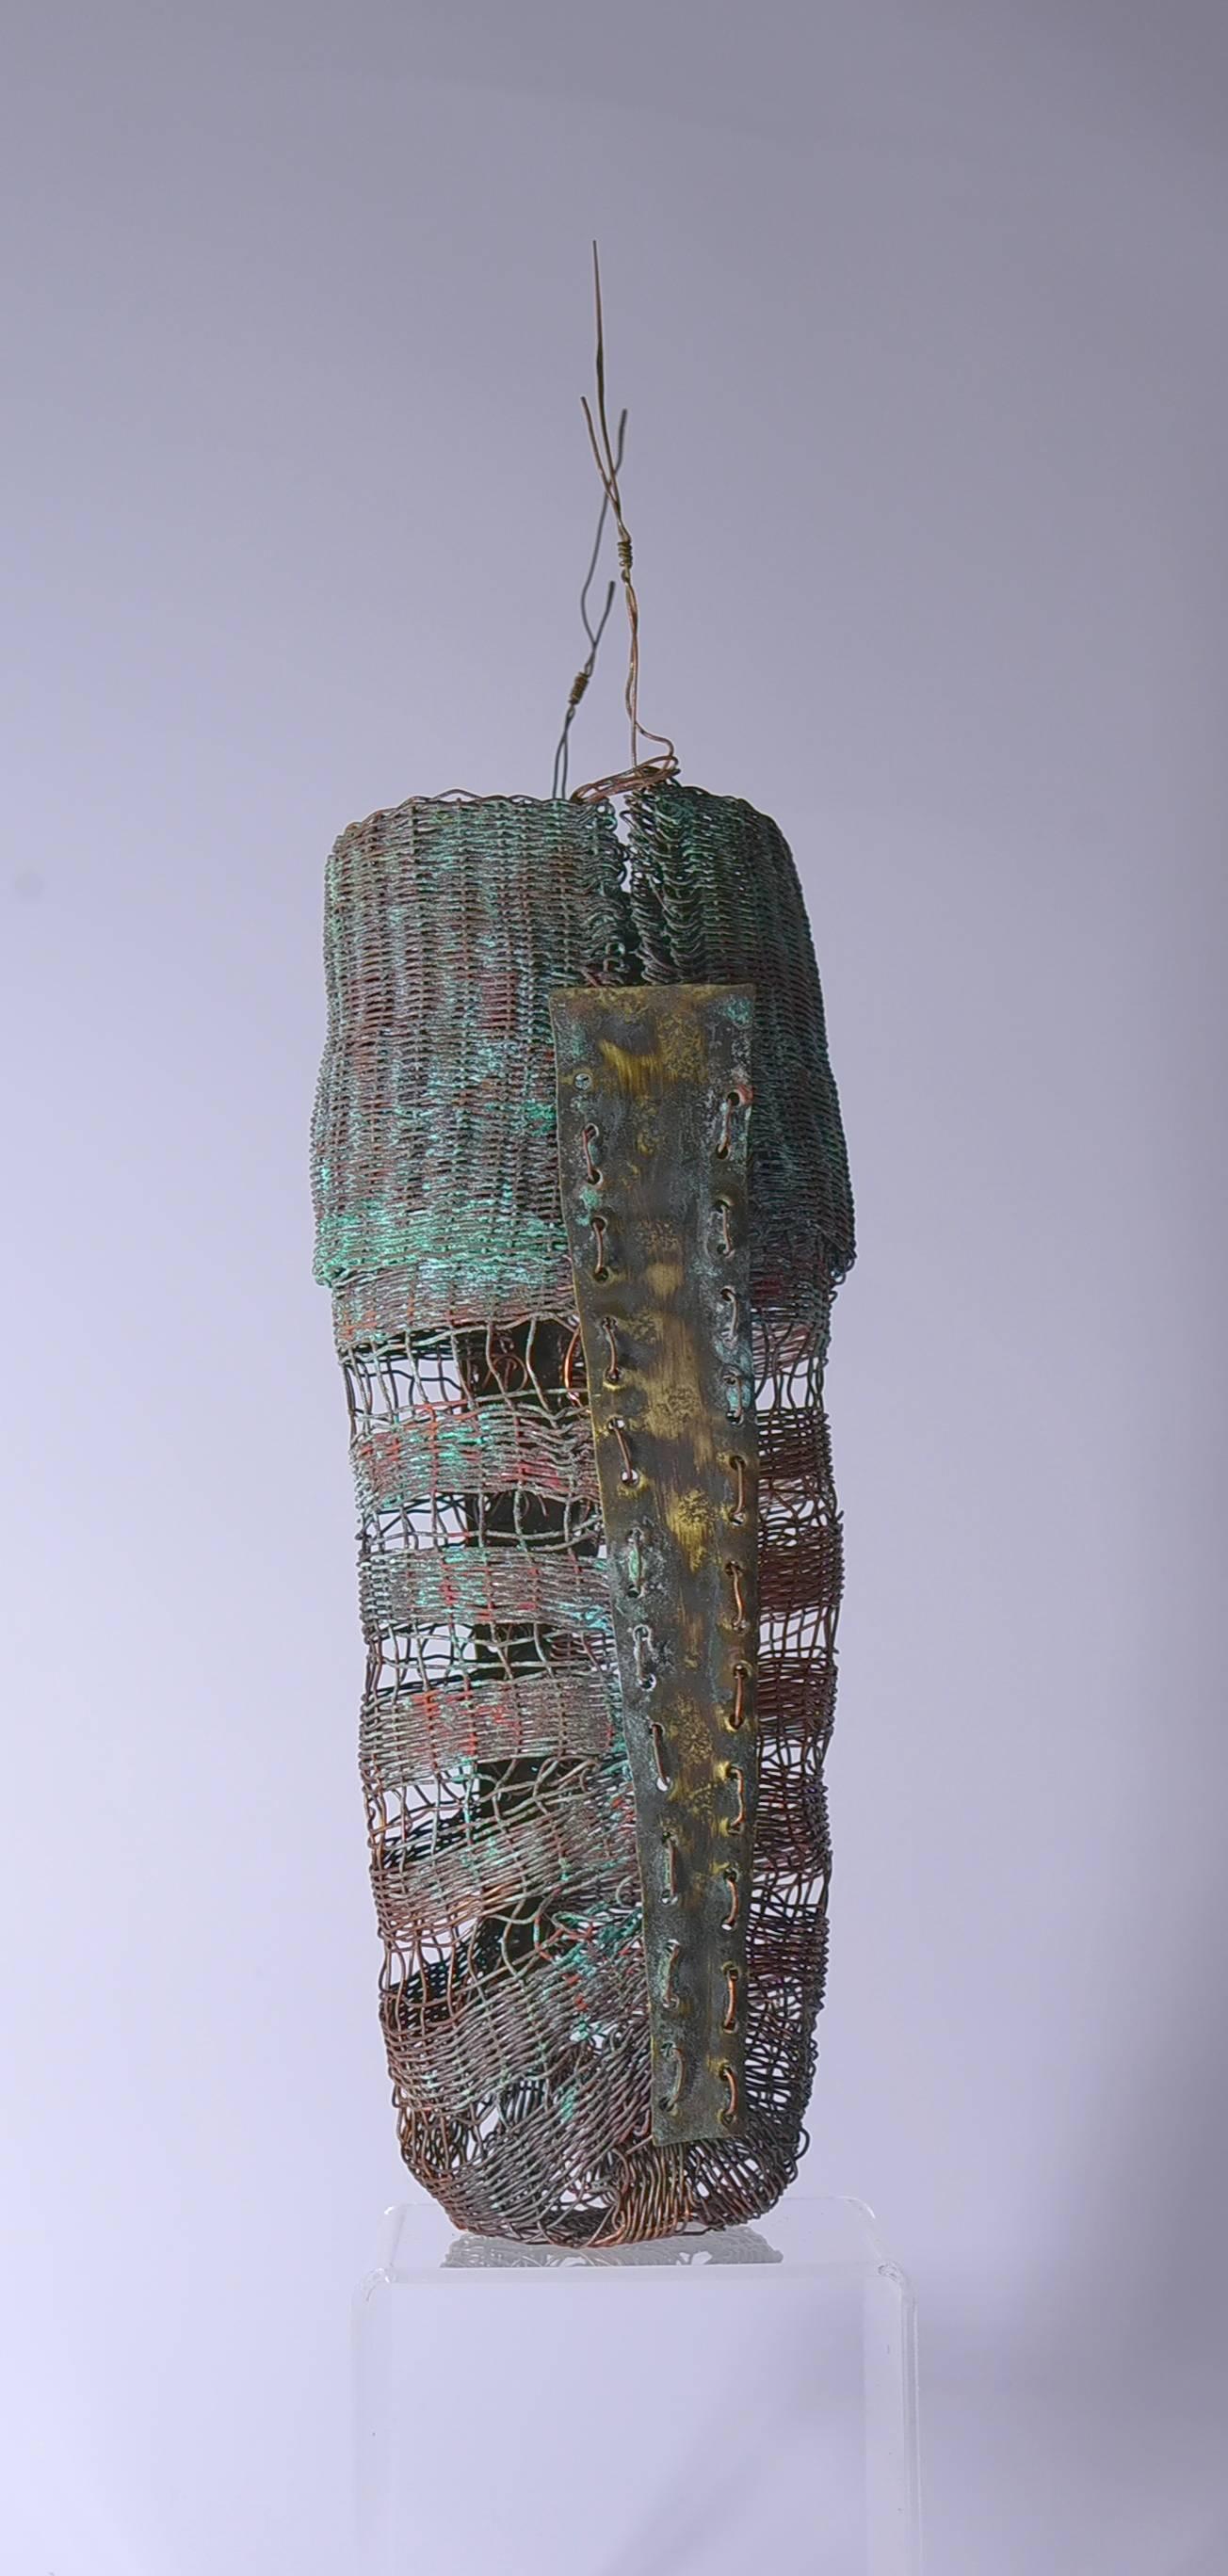 Stunning woven brass and copper sculpture by Kieta Jackson, titled Sedentary, c2015. 

Kieta Jackson's textile sculptures demonstrate two things, wonderful elegant containing forms and a sense of antiquity in another world and time. She works